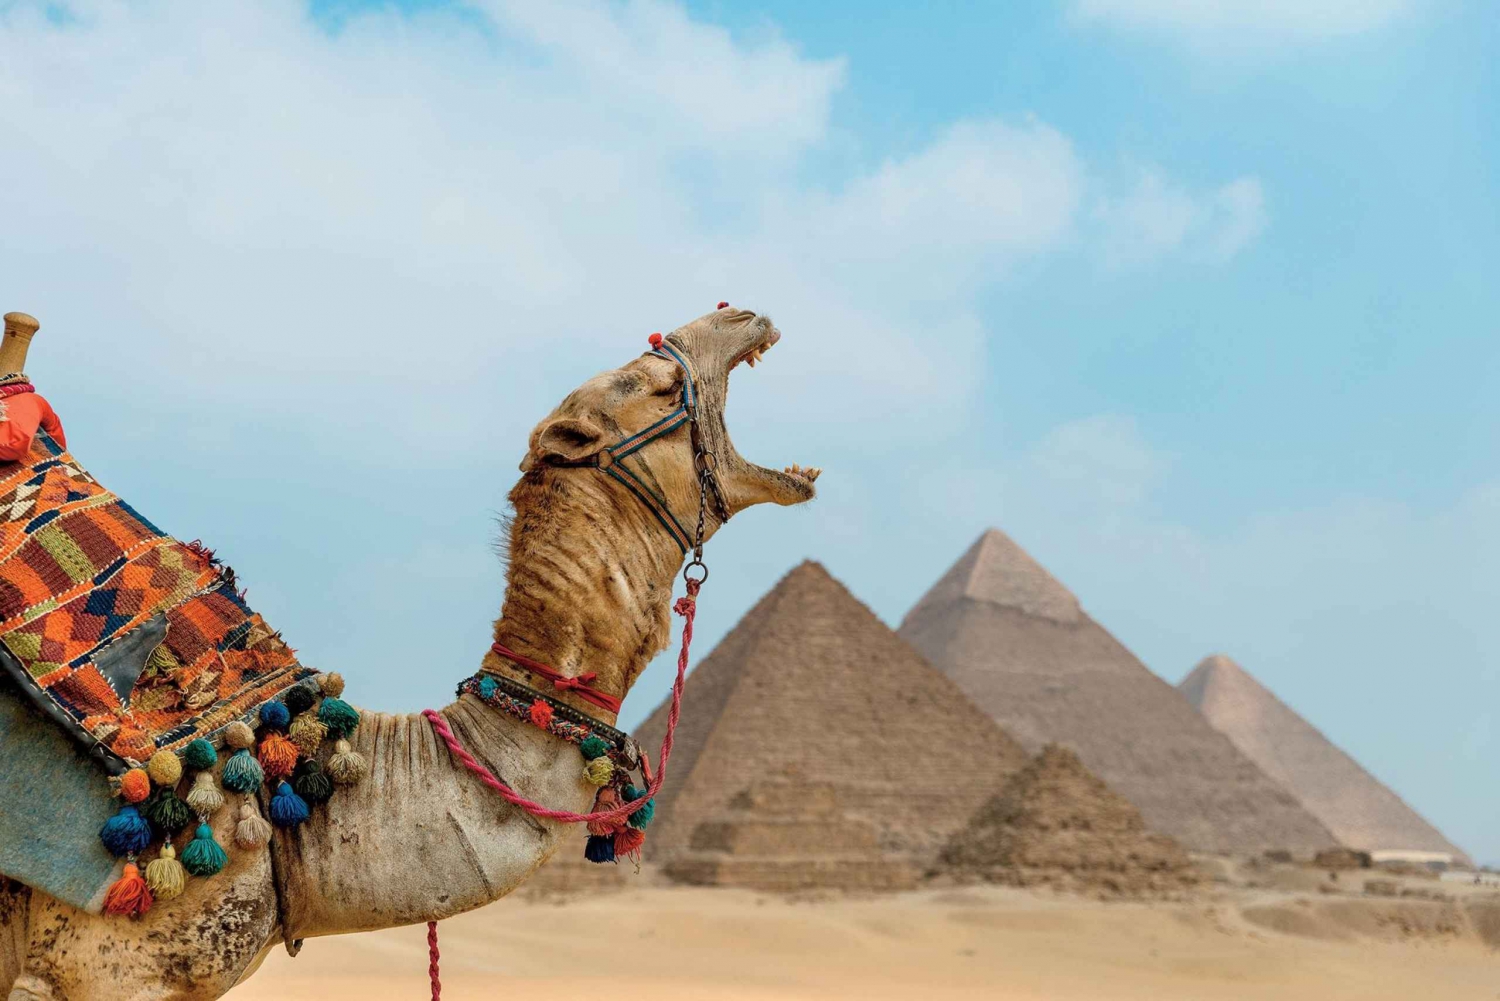 Celebrate Christmas & Watch the Wonders of Egypt in 8 days